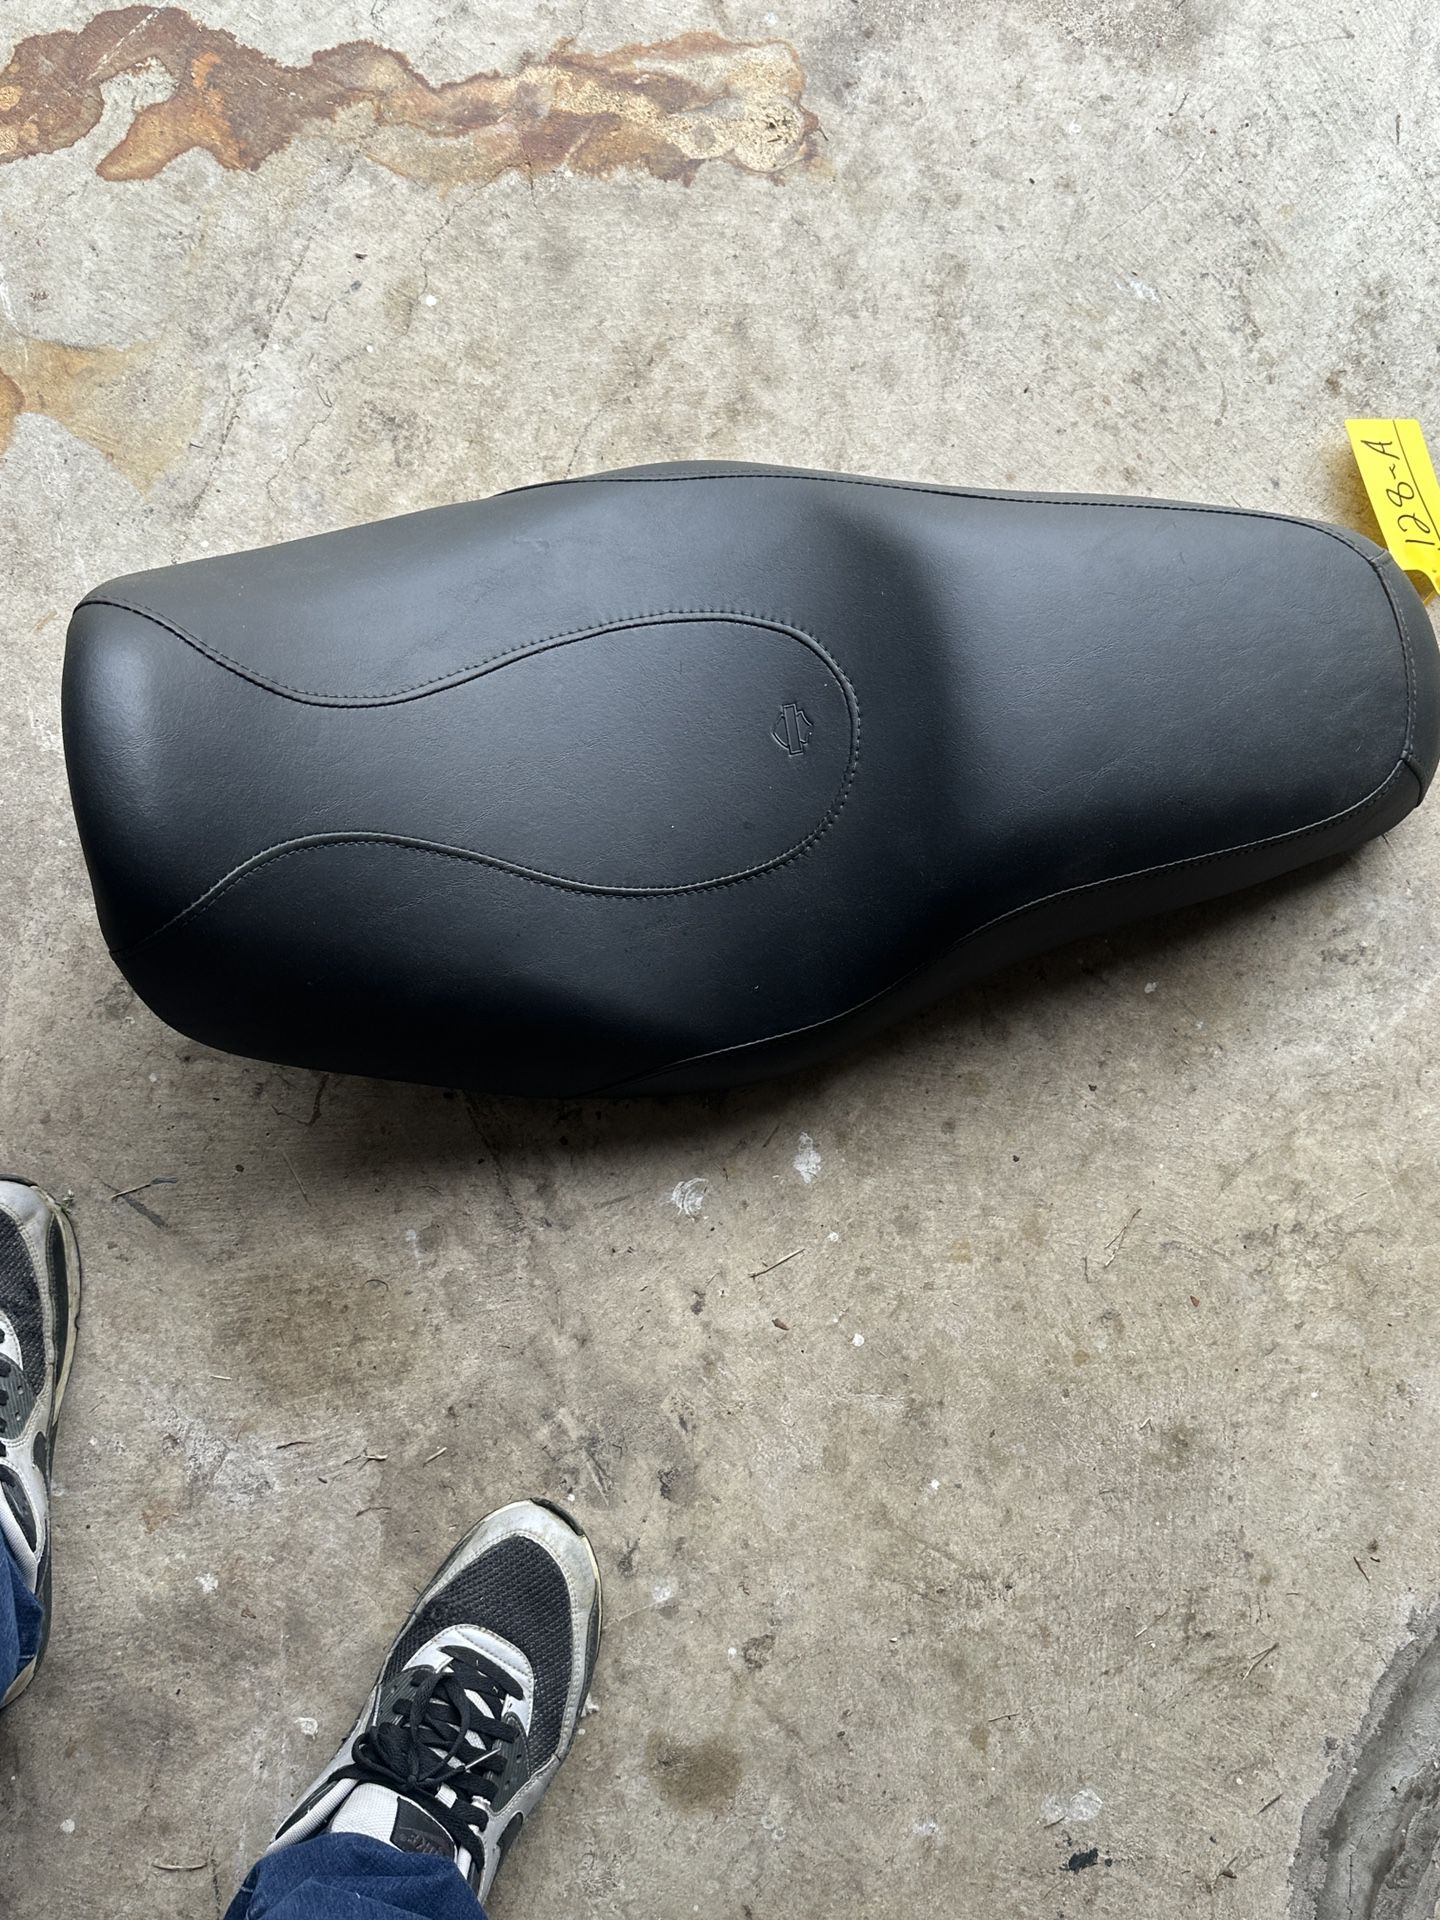 Motorcycle Seat For A Harley Davidson